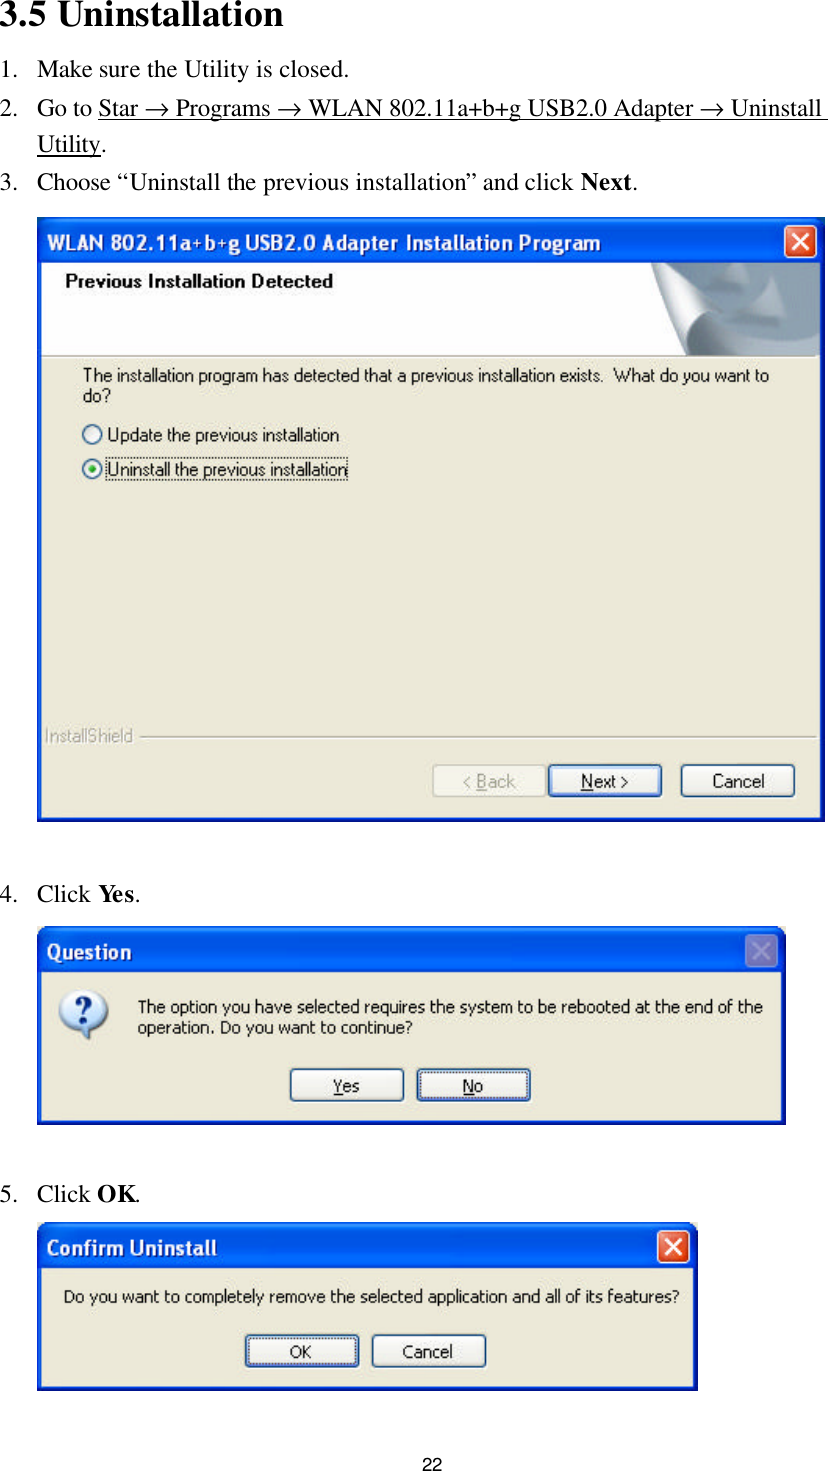 22 3.5 Uninstallation 1. Make sure the Utility is closed. 2. Go to Star → Programs → WLAN 802.11a+b+g USB2.0 Adapter → Uninstall Utility. 3. Choose “Uninstall the previous installation” and click Next.   4. Click Yes.   5. Click OK.  